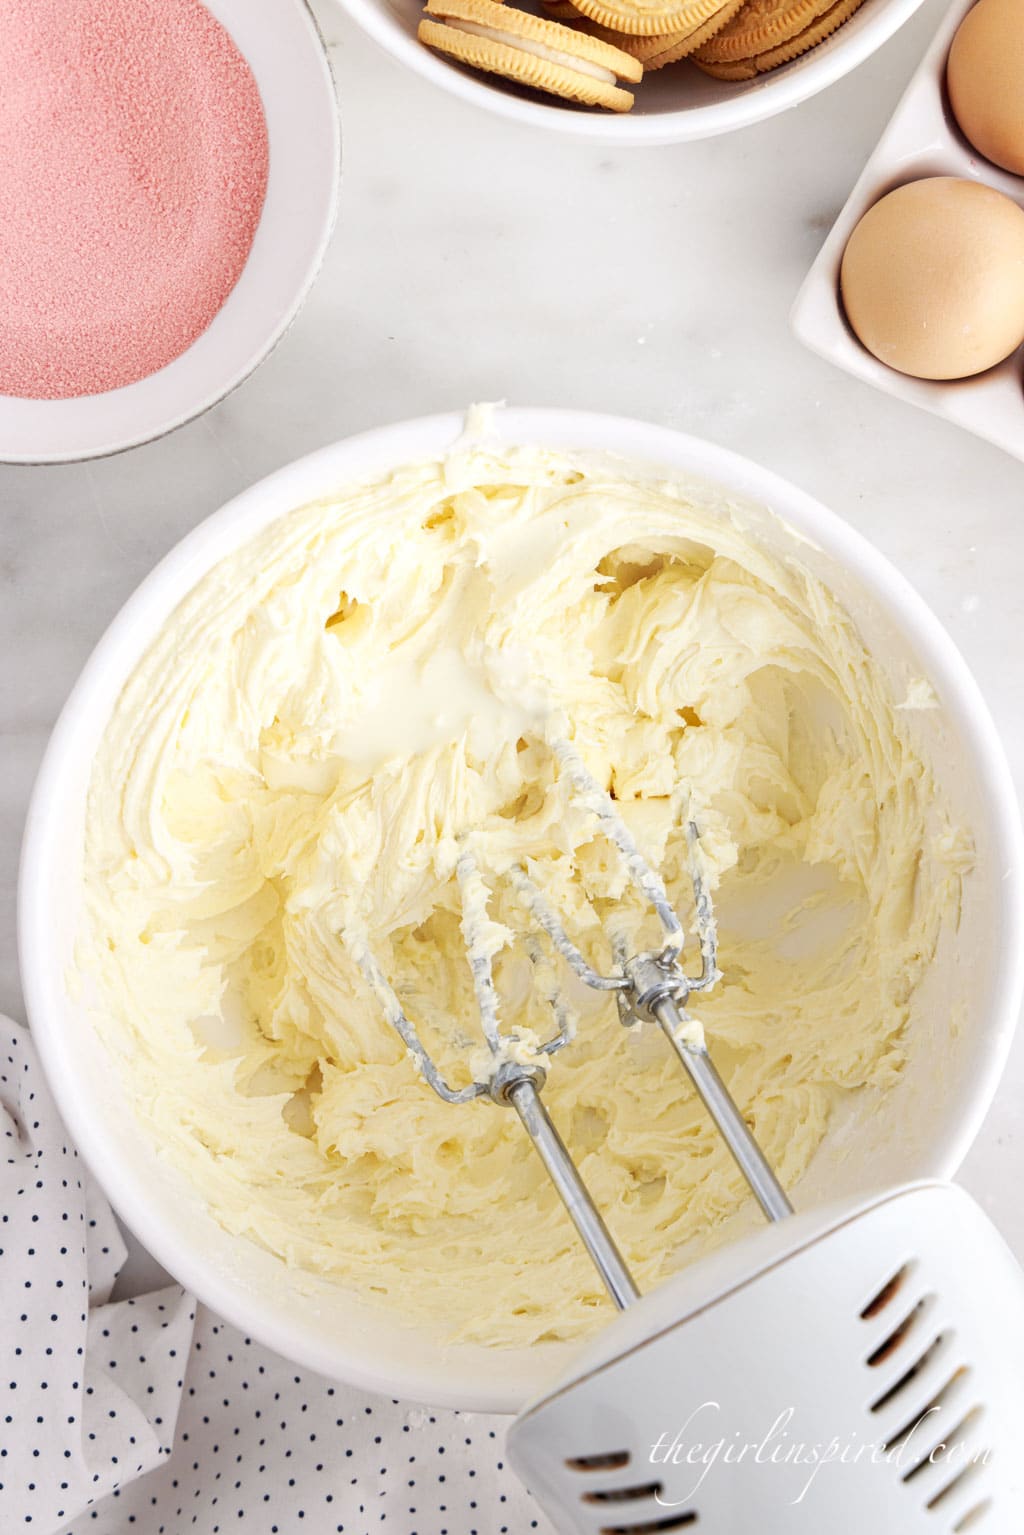 mixing cream cheese frosting ingredients with a hand mixer